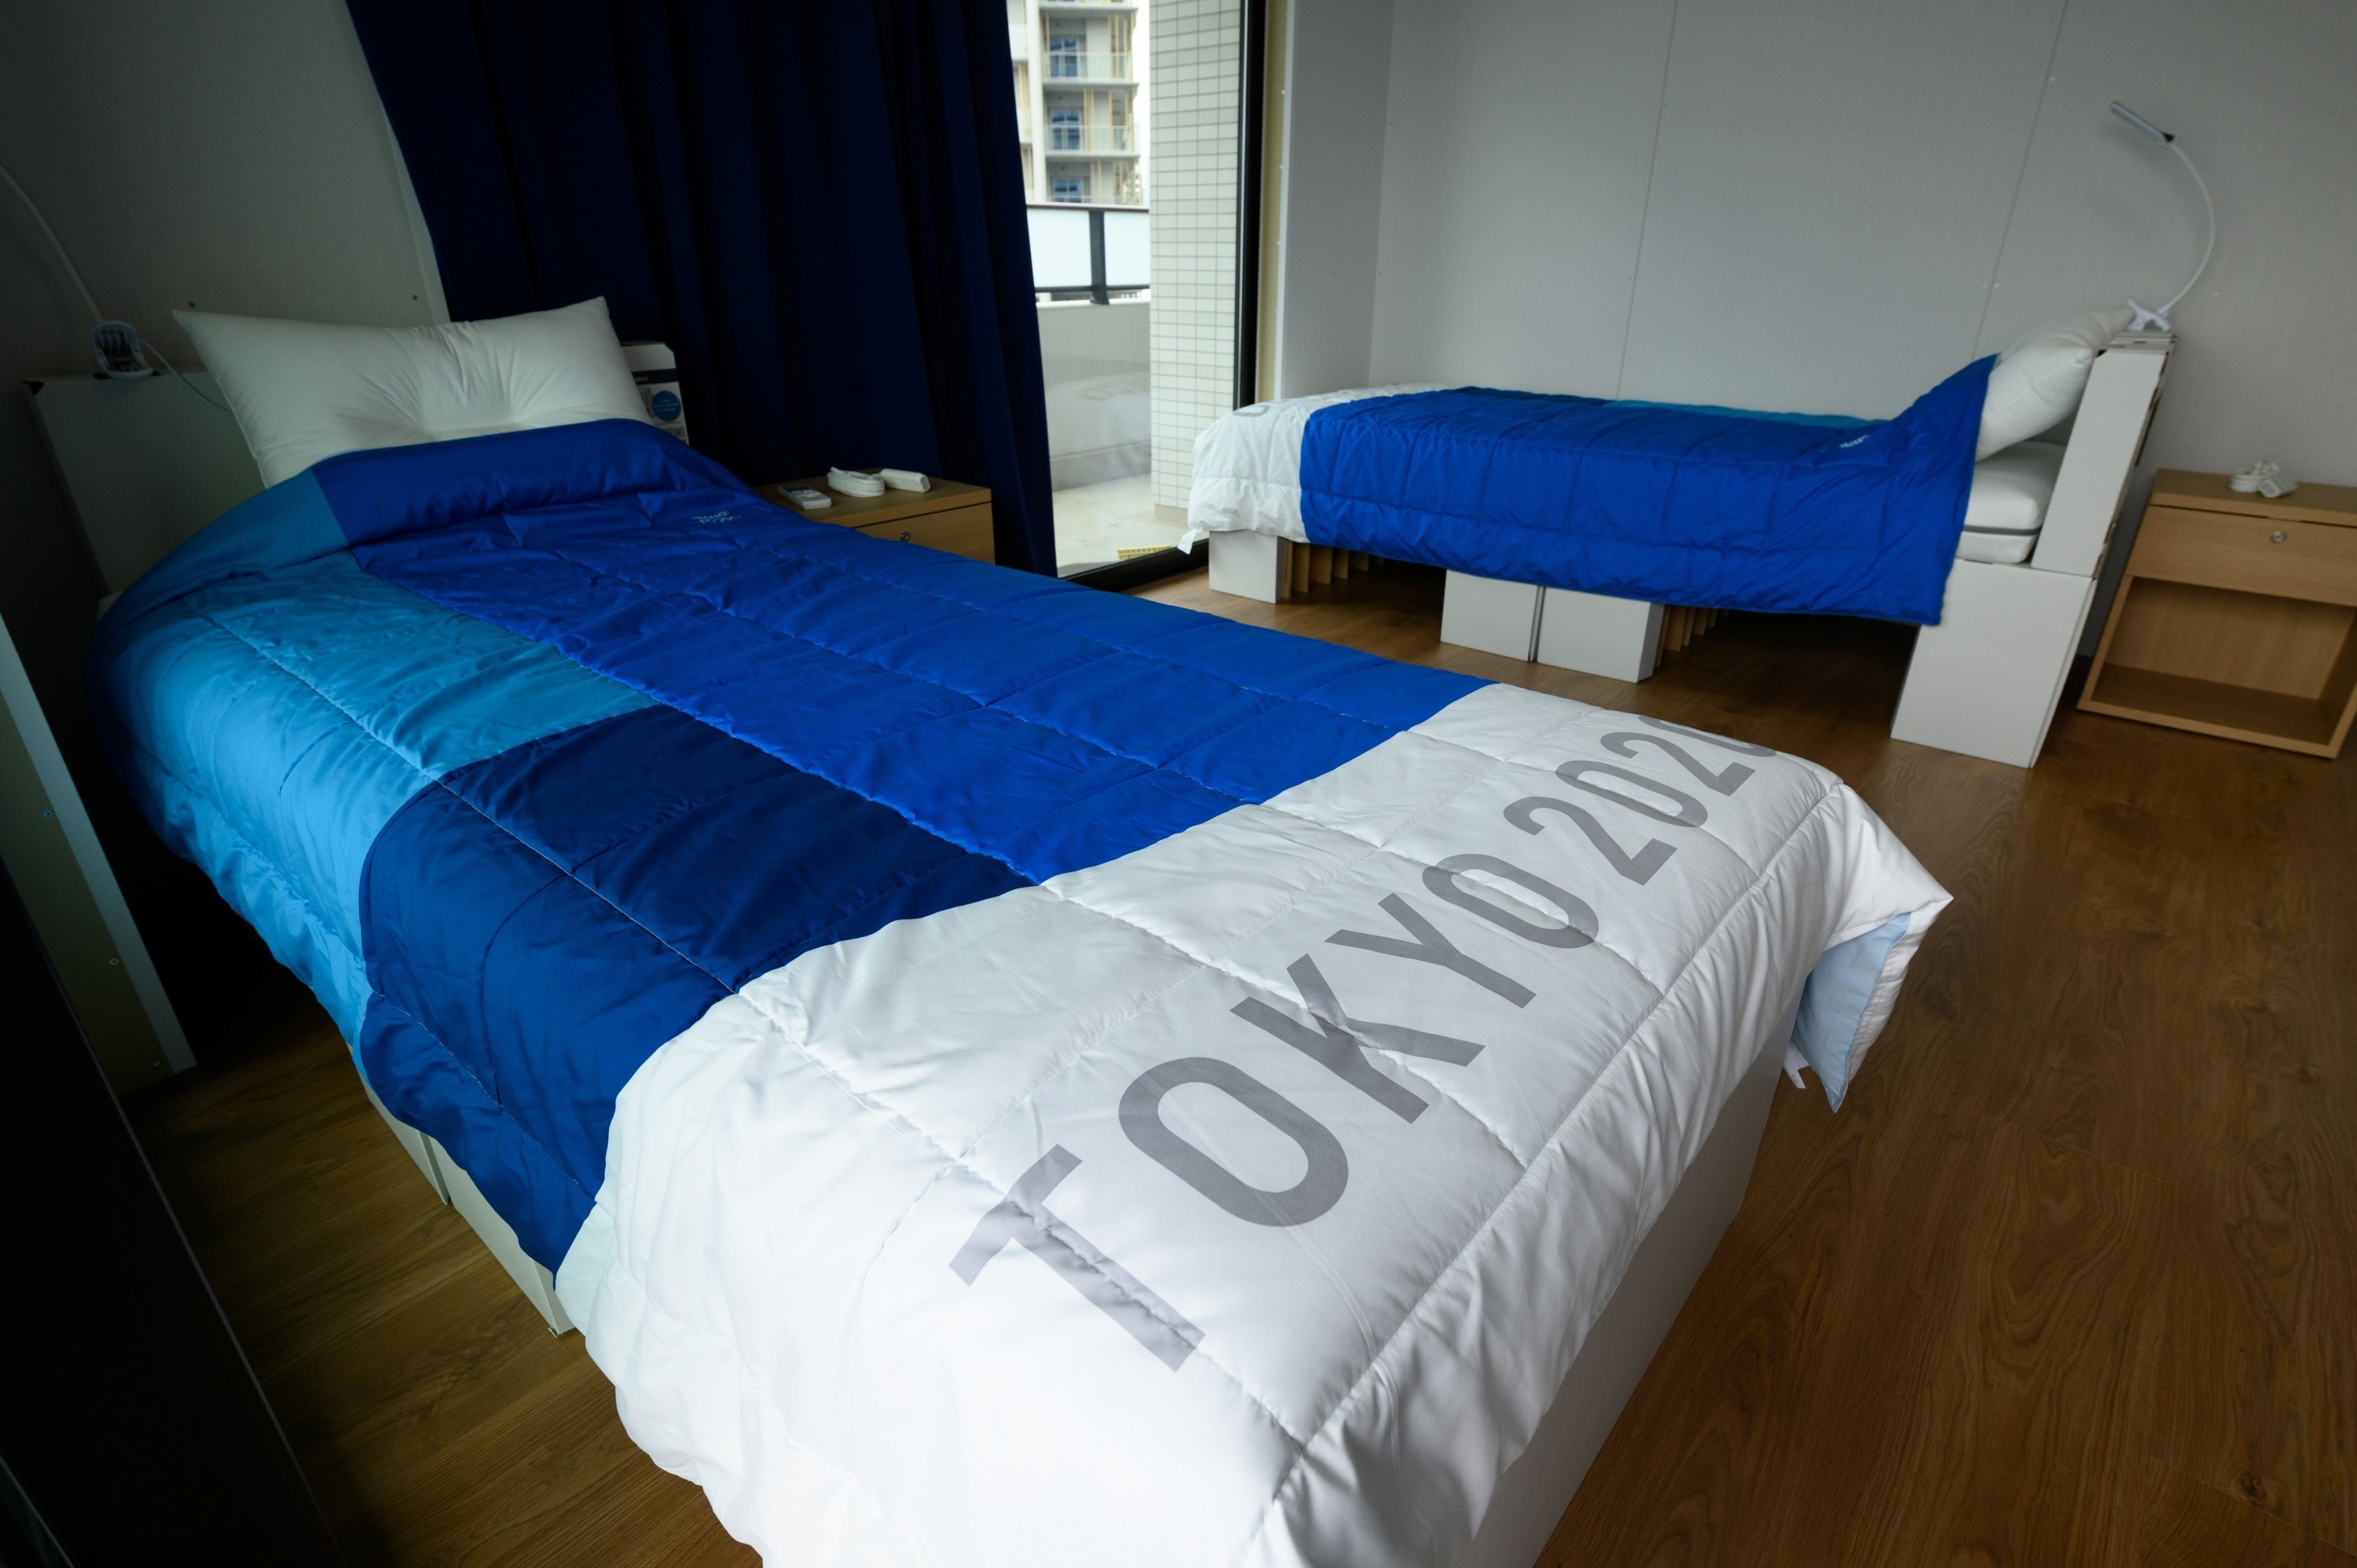 Recyclable cardboard beds and mattresses for athletes at the Olympic and Paralympic Village for the Tokyo 2020 Games, in Tokyo, Japan, June 20, 2021. (Reuters Photo)